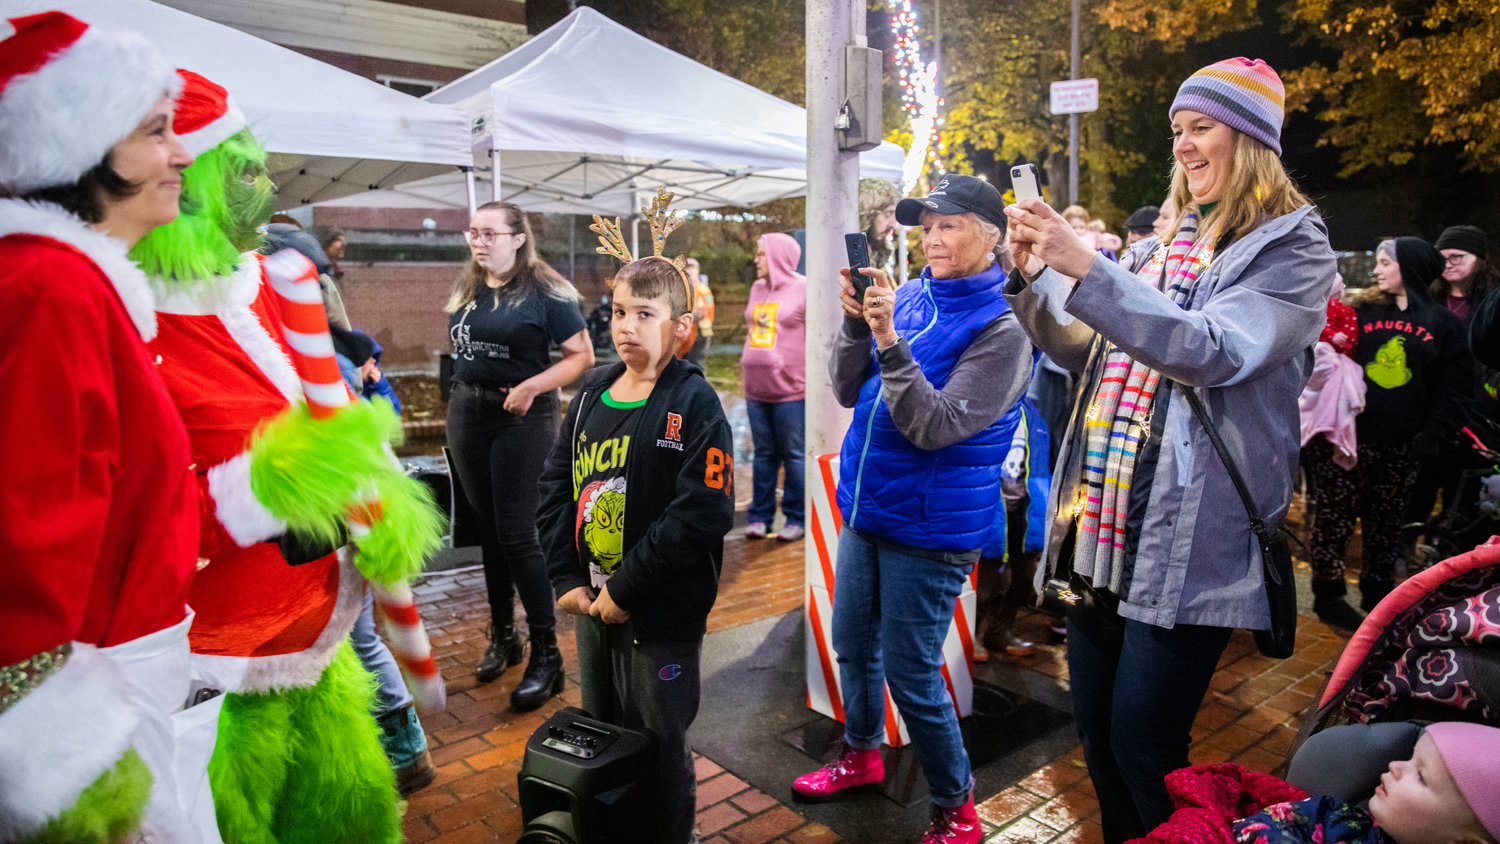 Mayor Kelly Smith Johnston smiles while taking photos of the Grinch and Cindy Lou Who at George Washington Park during a Christmas Tree Lighting celebration on Friday.